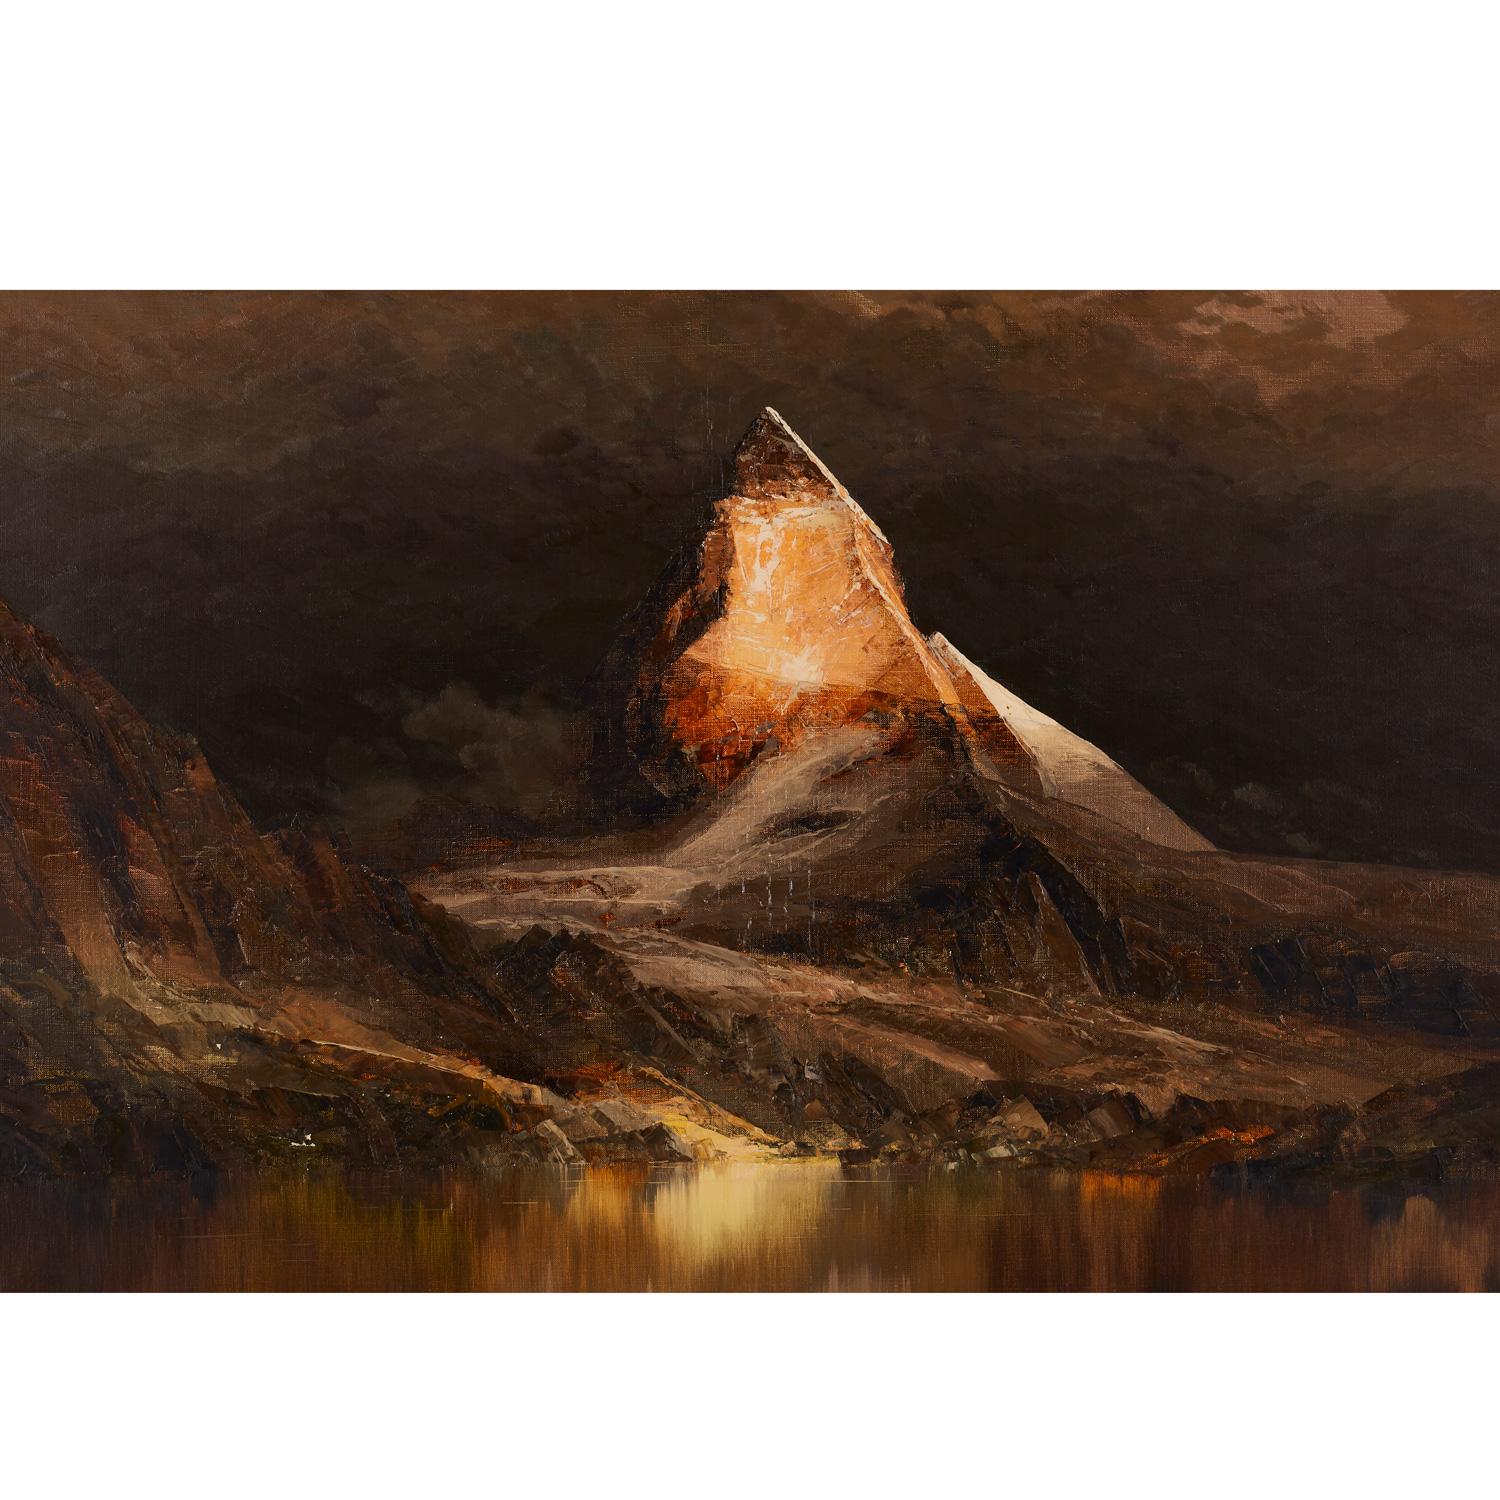 Dark and foreboding are an understatement. Hang this Mordor-esque mountain scape behind your office desk to intimidate and get the upper hand during your negotiations. Frighteningly beautiful. Masculinity and serenity in perfect balance. Signed by